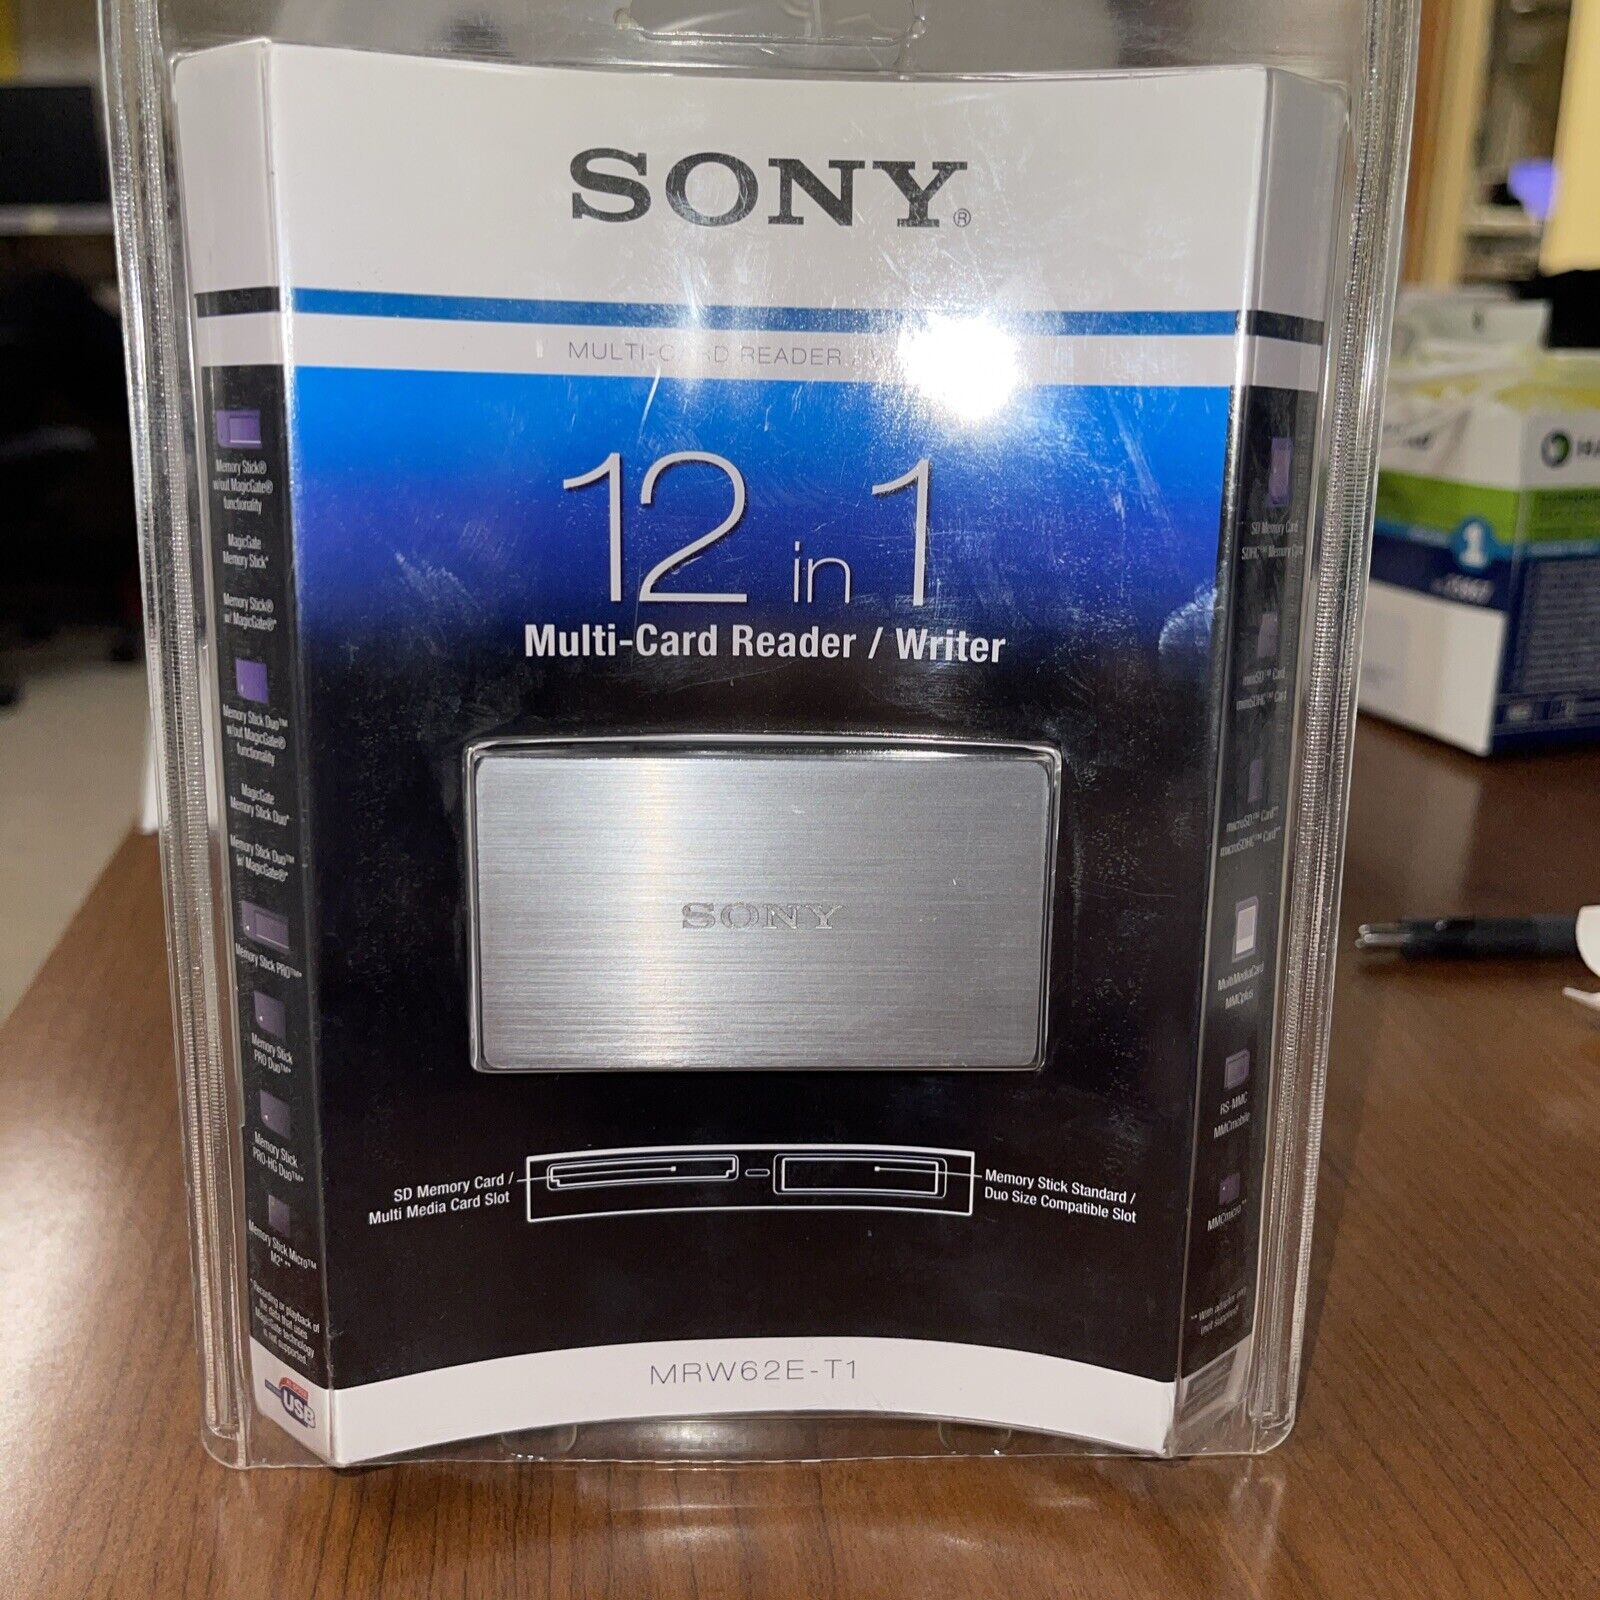 NEW UNOPENED PACKAGE Sony 12 in 1 Multi-Card Reader Writer MRW62E-T1 